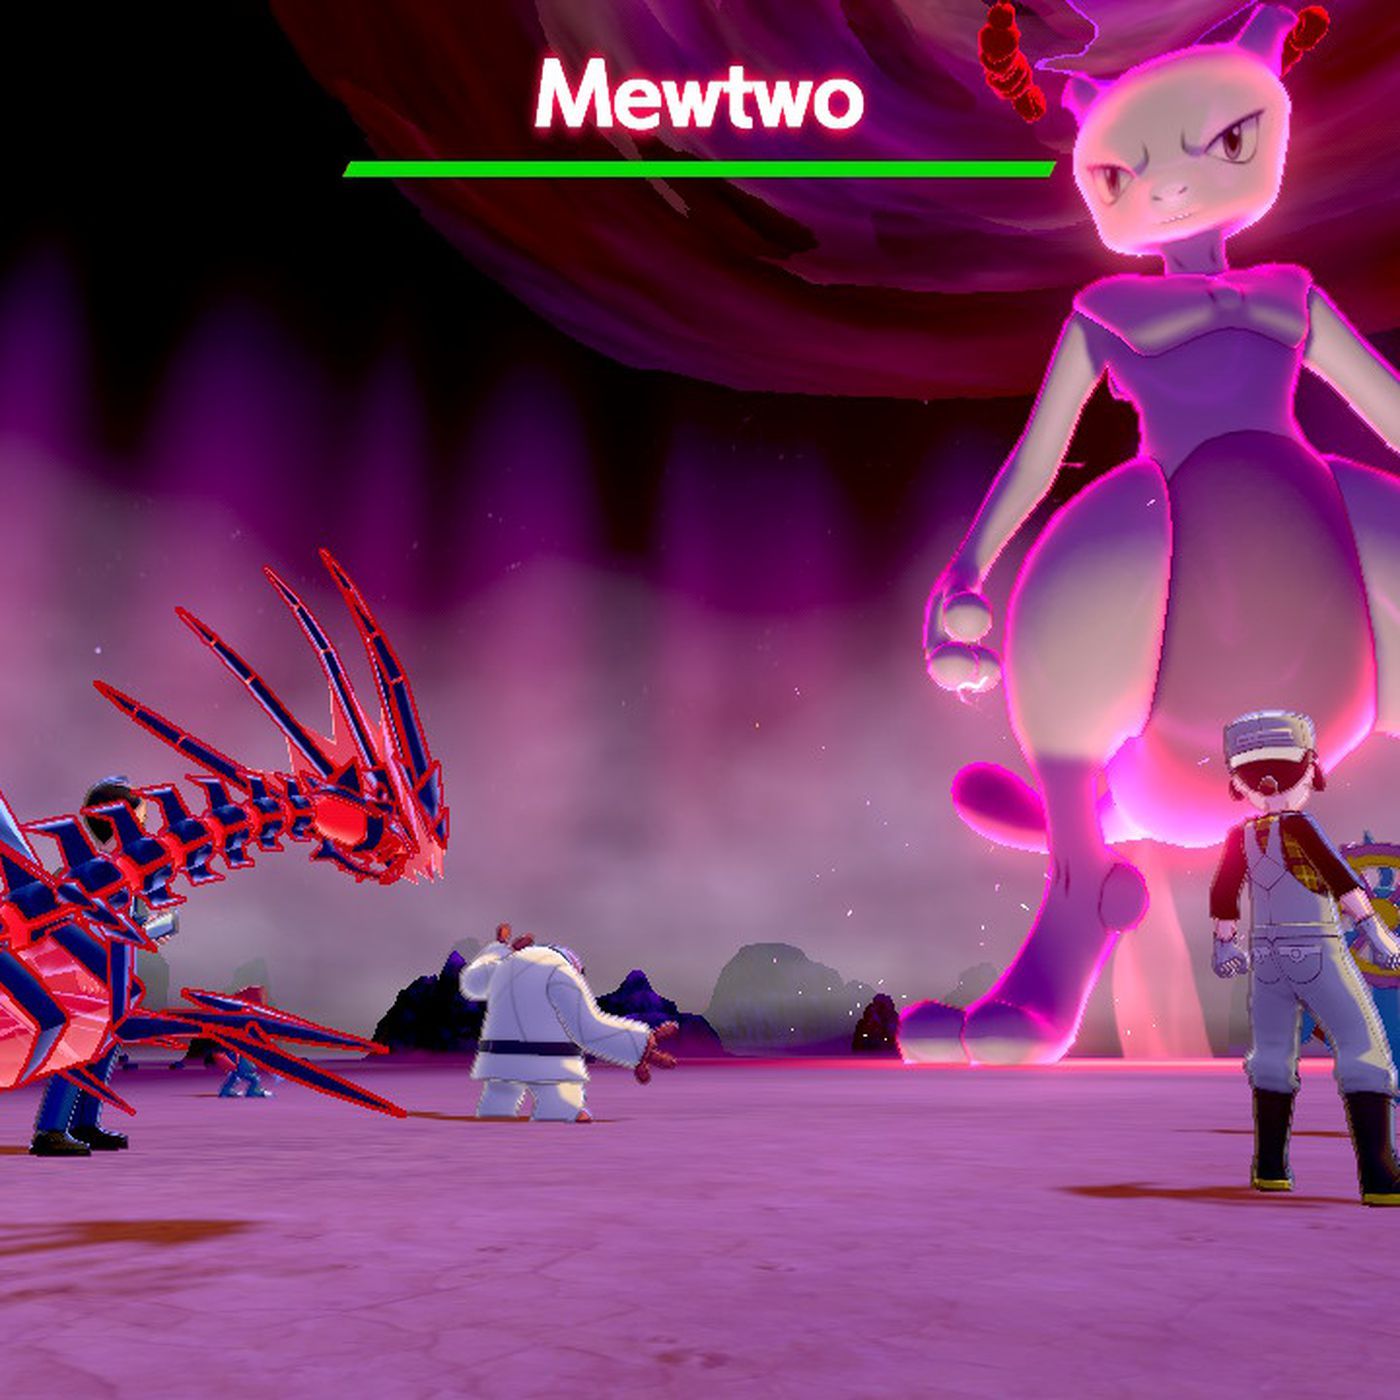 Mewtwo is nearly impossible to beat in new Pokémon Sword